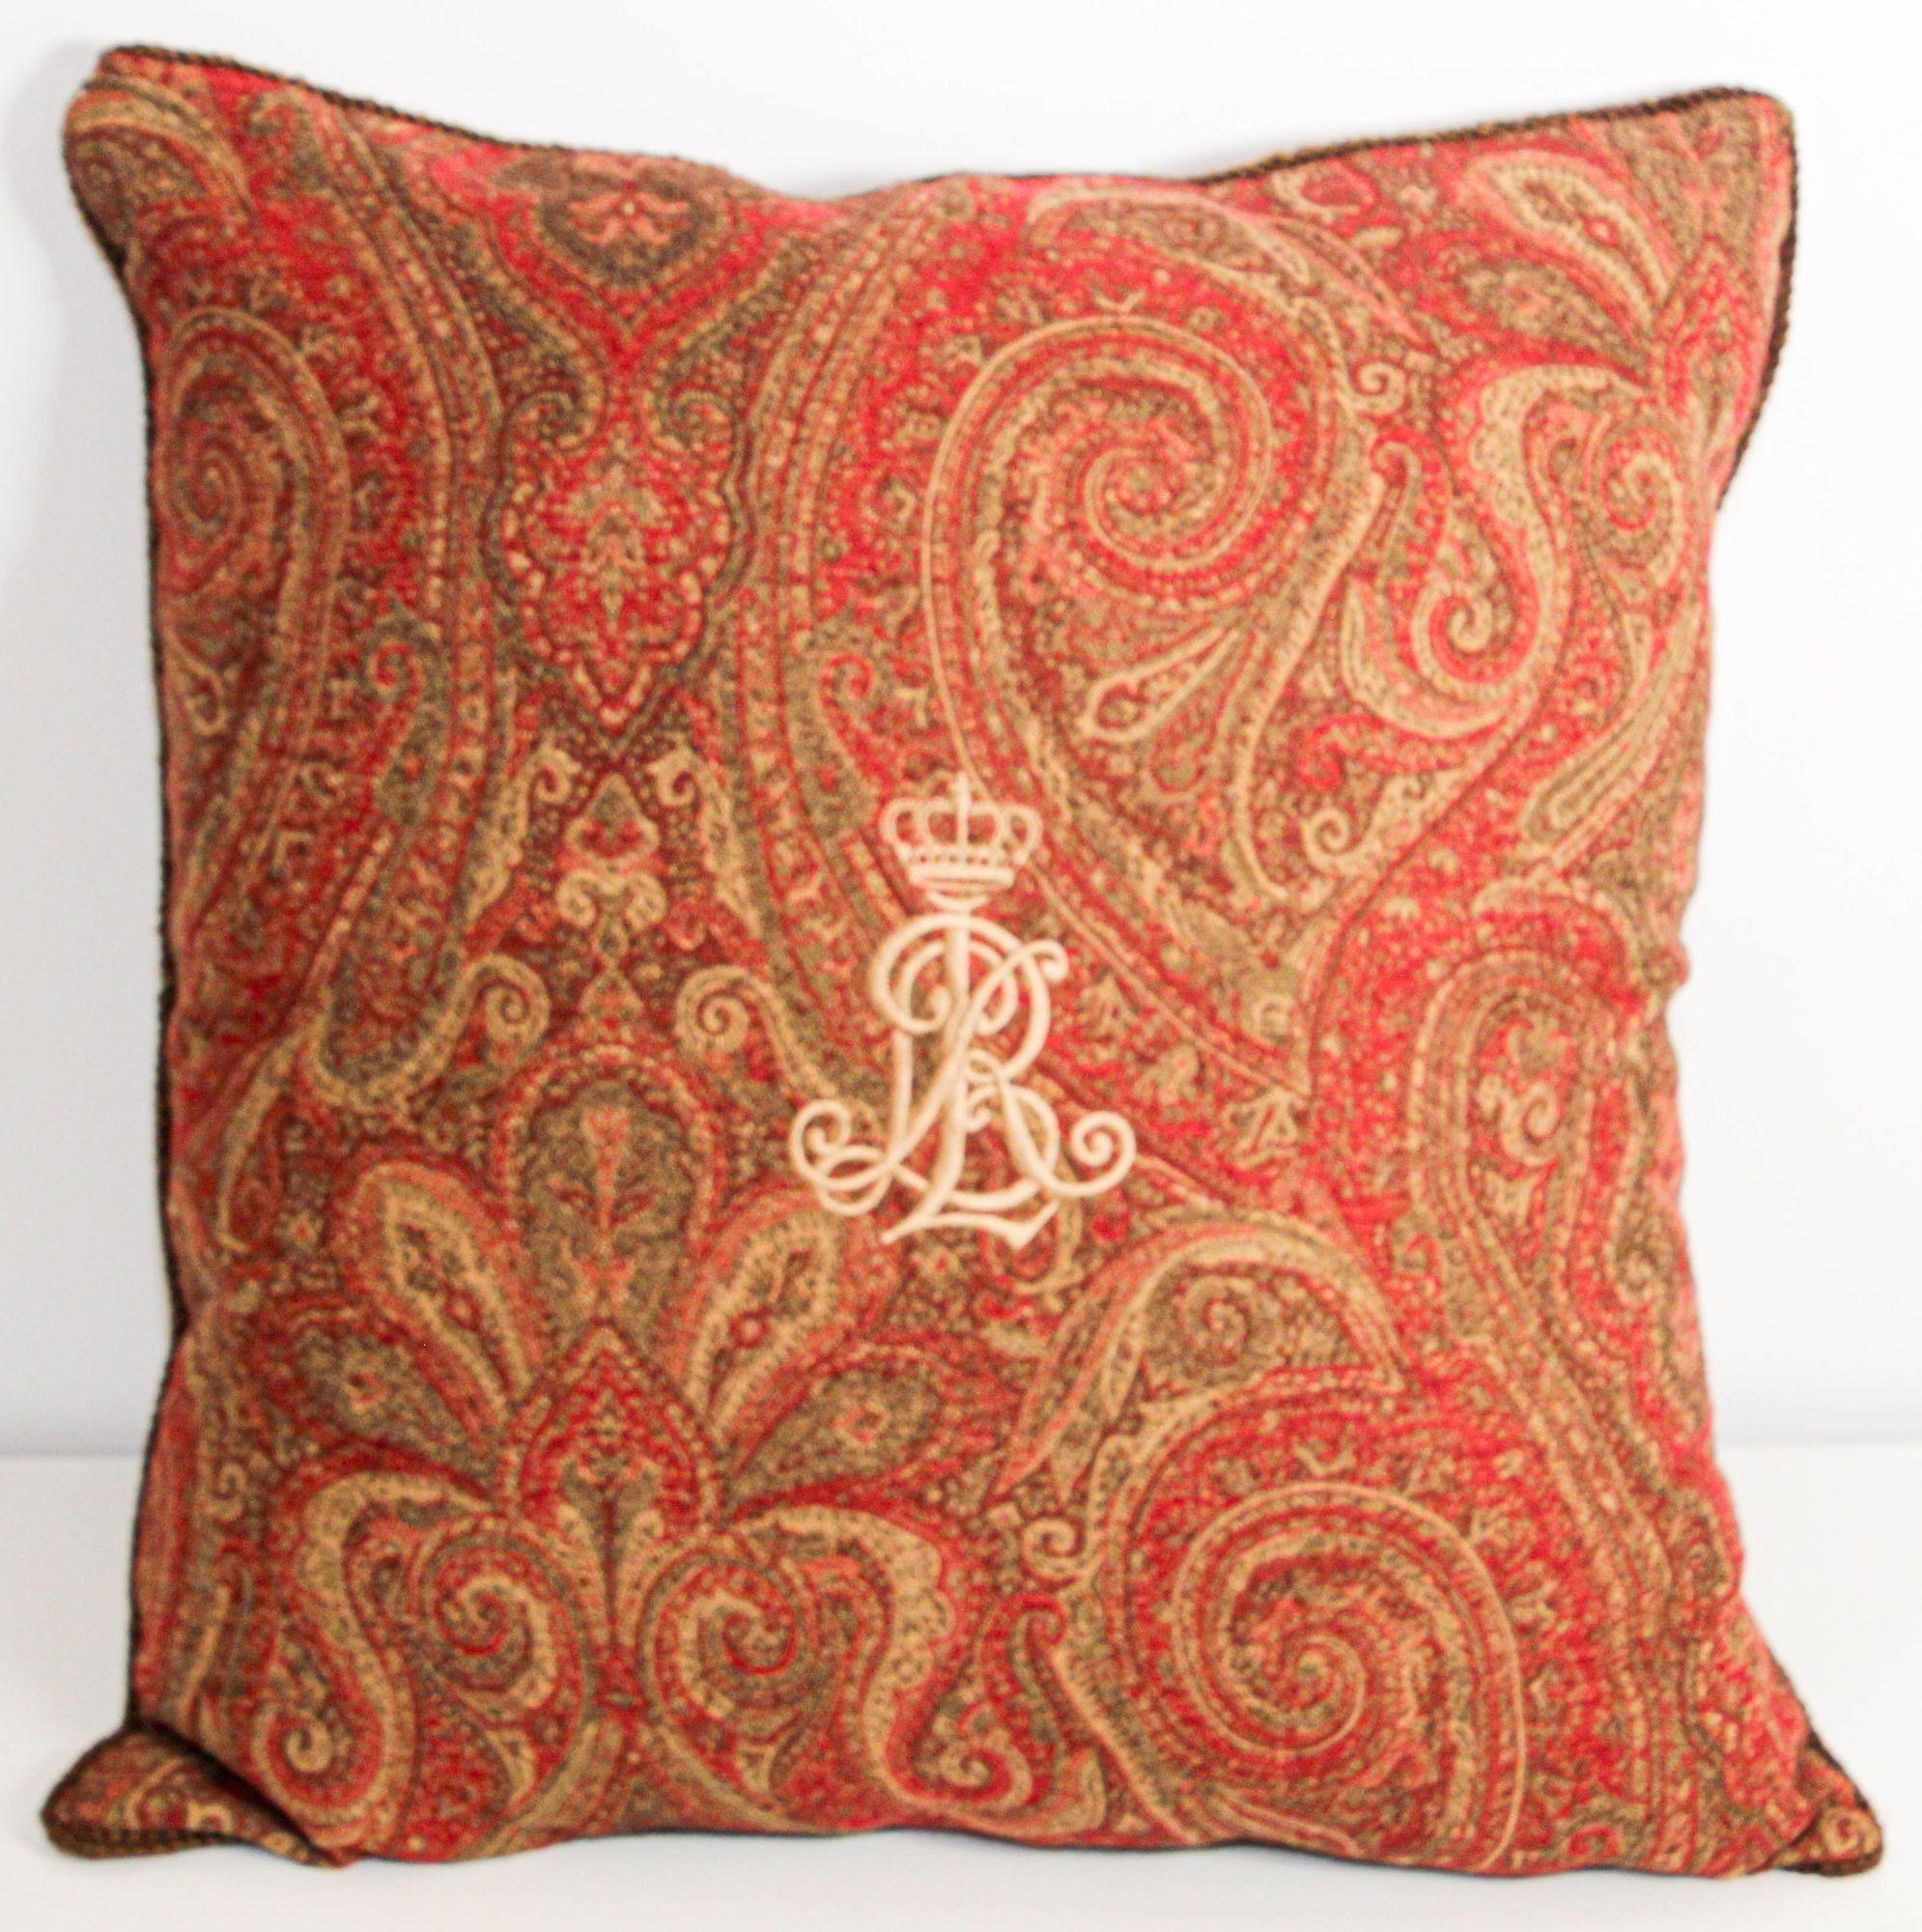 Vintage Ralph Lauren crown logo sofa or bed decorative pillow in red burgundy and gold paisley.
Vintage Ralph Lauren Pillow in Red and Gold Paisley RL Crown Logo square shape.
Subtle paisley and floral designs in multi colors on red, reverse is the